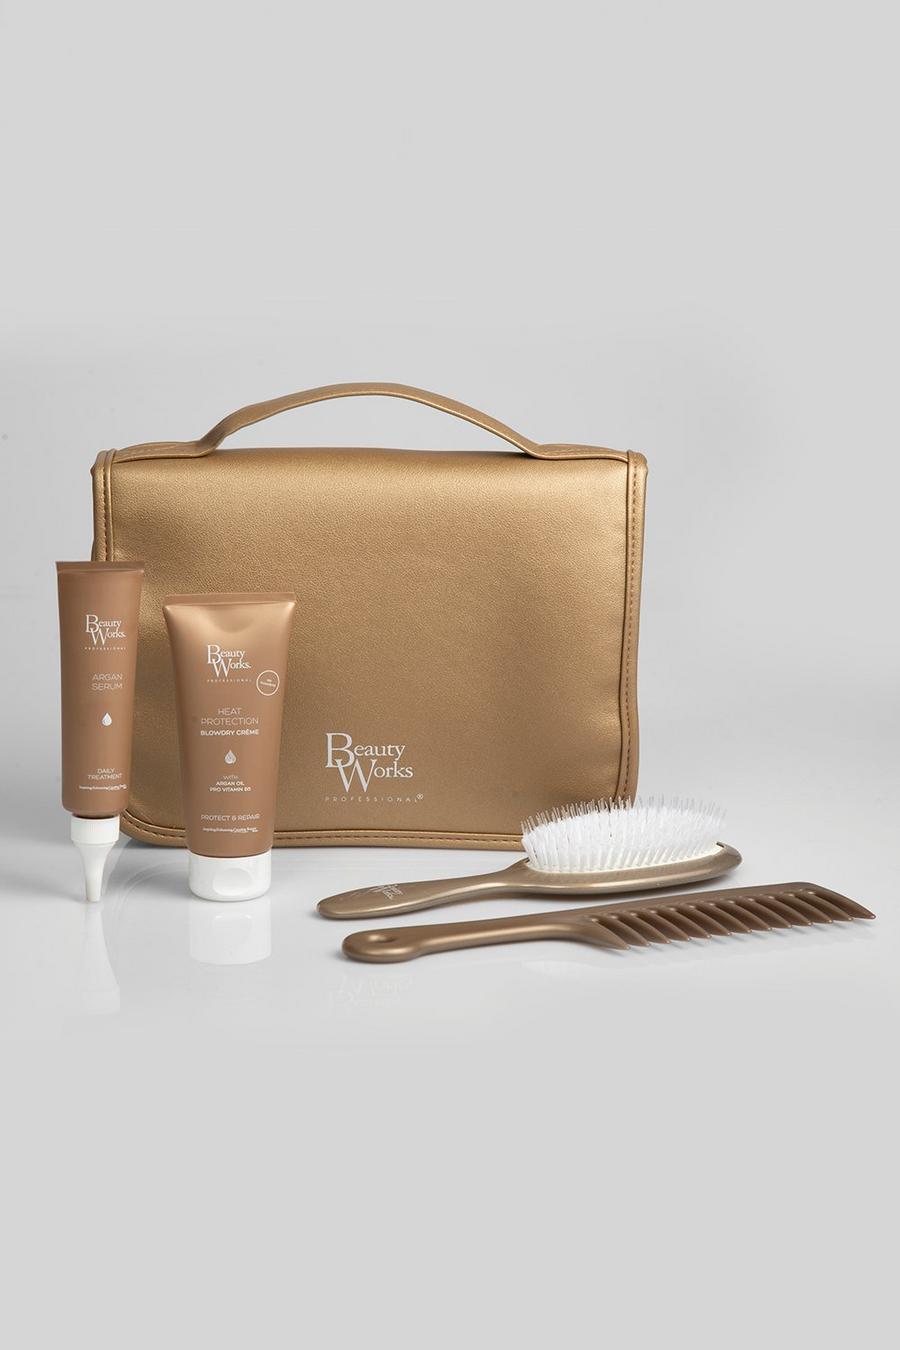 Beauty Works Mane Attraction Styling Kit, Gold metallic